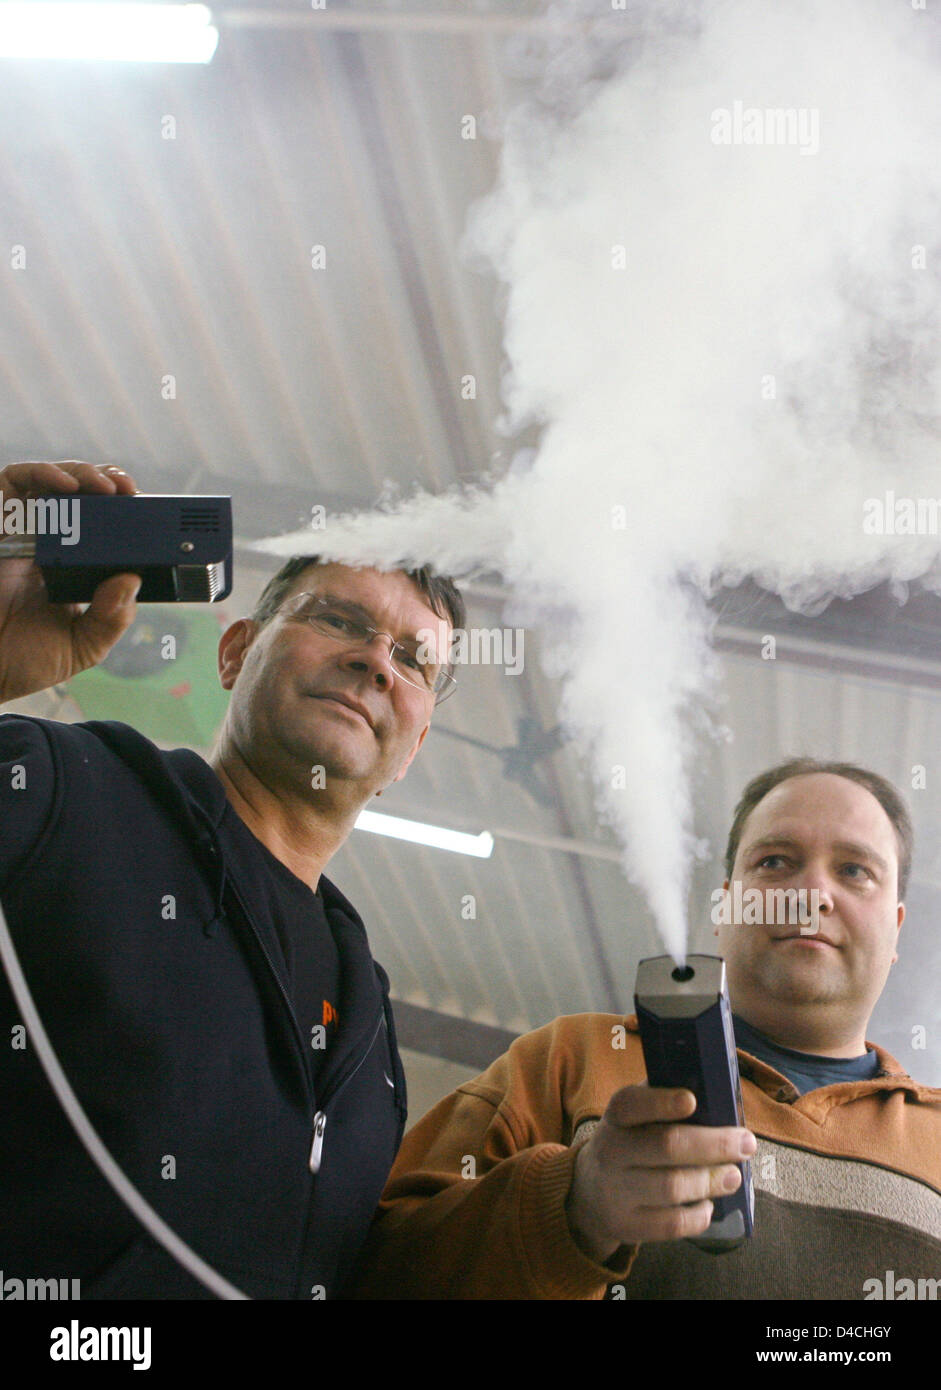 Ruediger Kleinke (L) and Joerg Poehler demonstrate their self designed micro fog machines at their company OTTEC Technology in Ronnenberg near Hanover, Germany, 5 February 2008. The Academy of Motion Picture Arts and Sciences in Hollywood awards the 'Technology Oscar' for the invention of the battery powered micro fog machine on 9th February. The device produces so-called 'tiny-fog Stock Photo